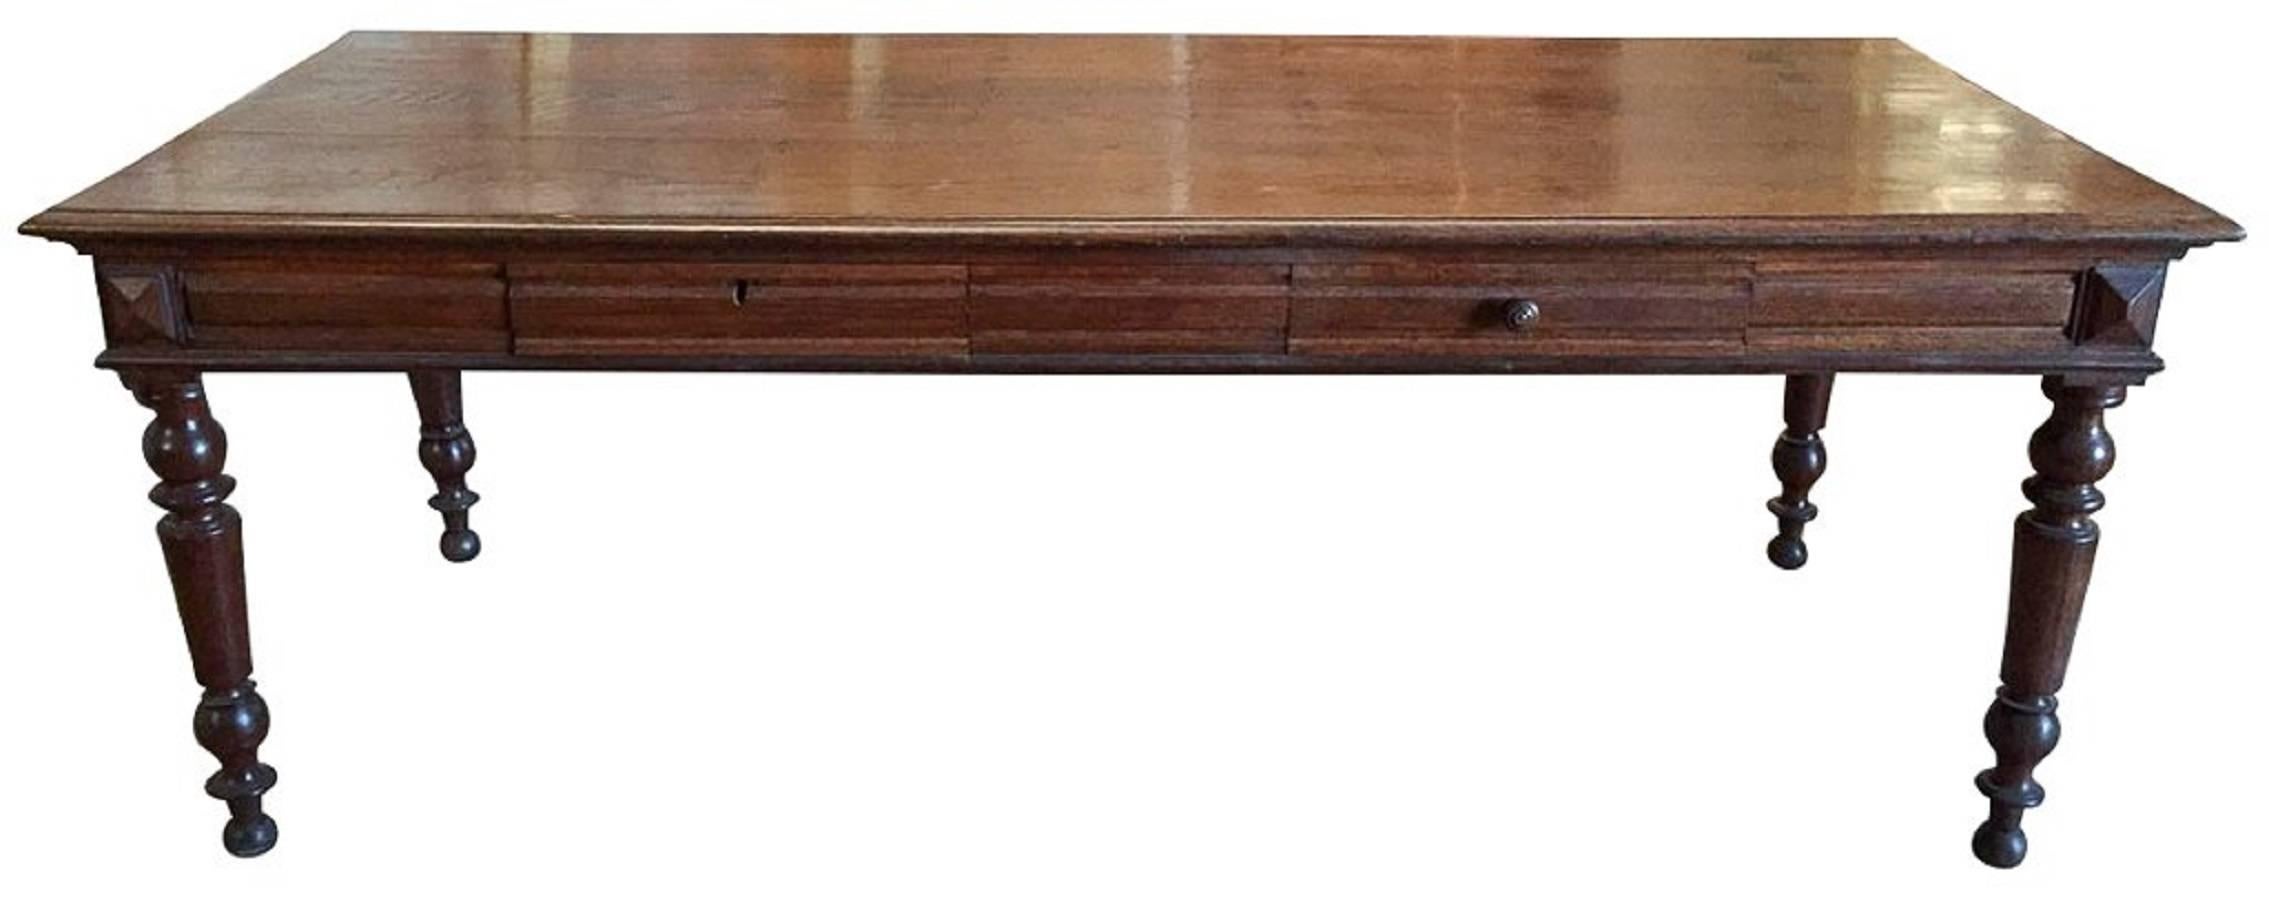 Louis Philippe oak desk or library table with two drawers, 19th century.
 